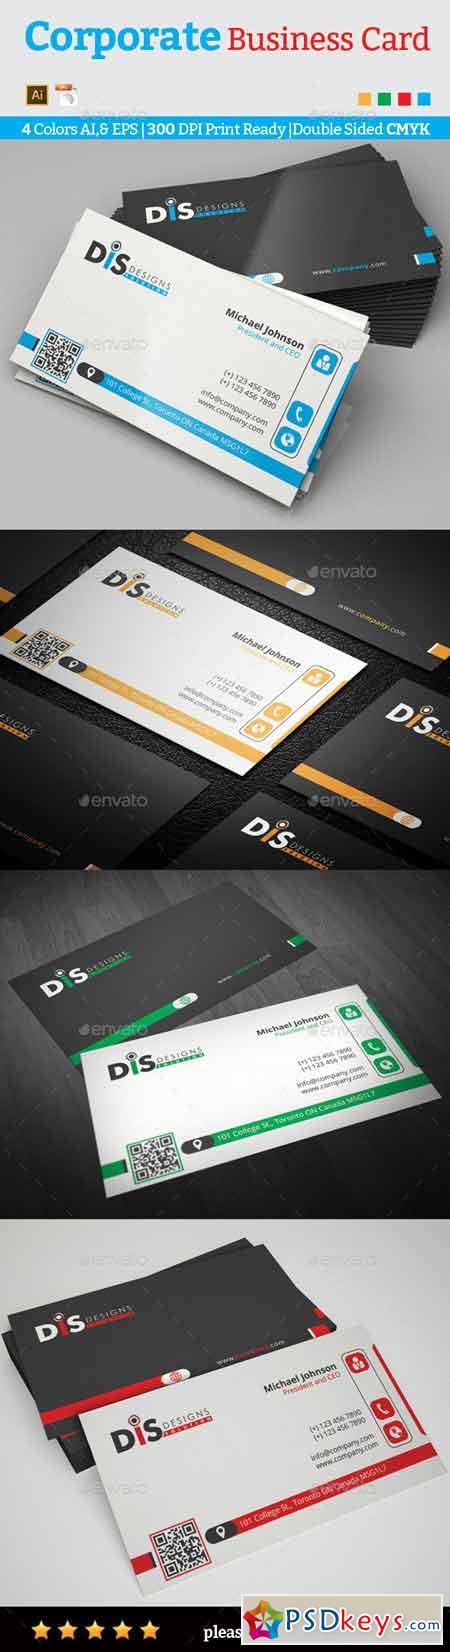 Business Card 13358086